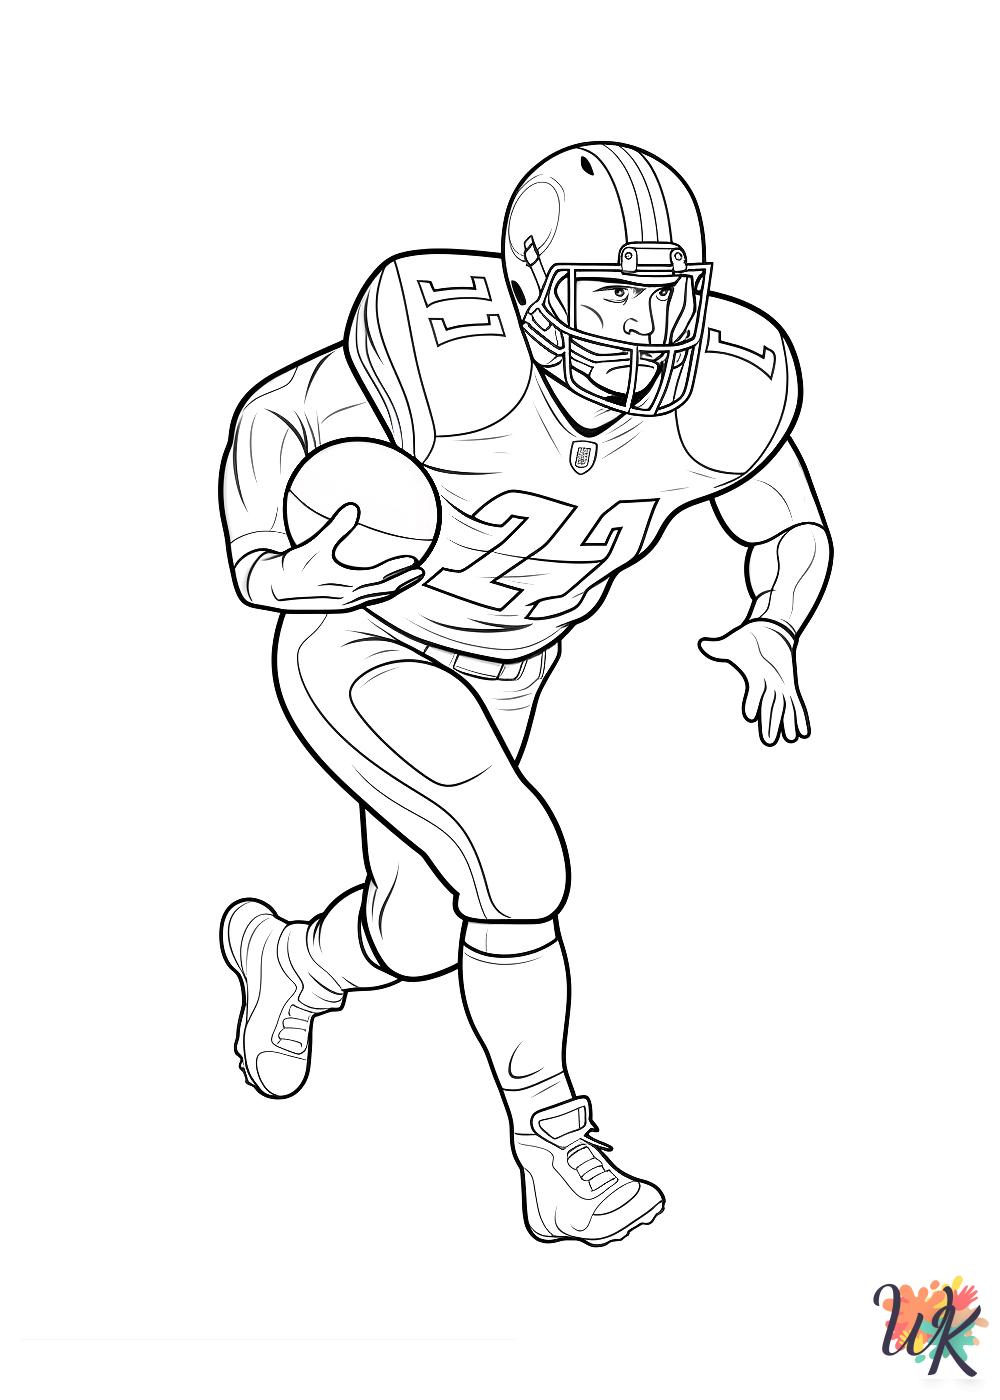 kawaii cute NFL coloring pages